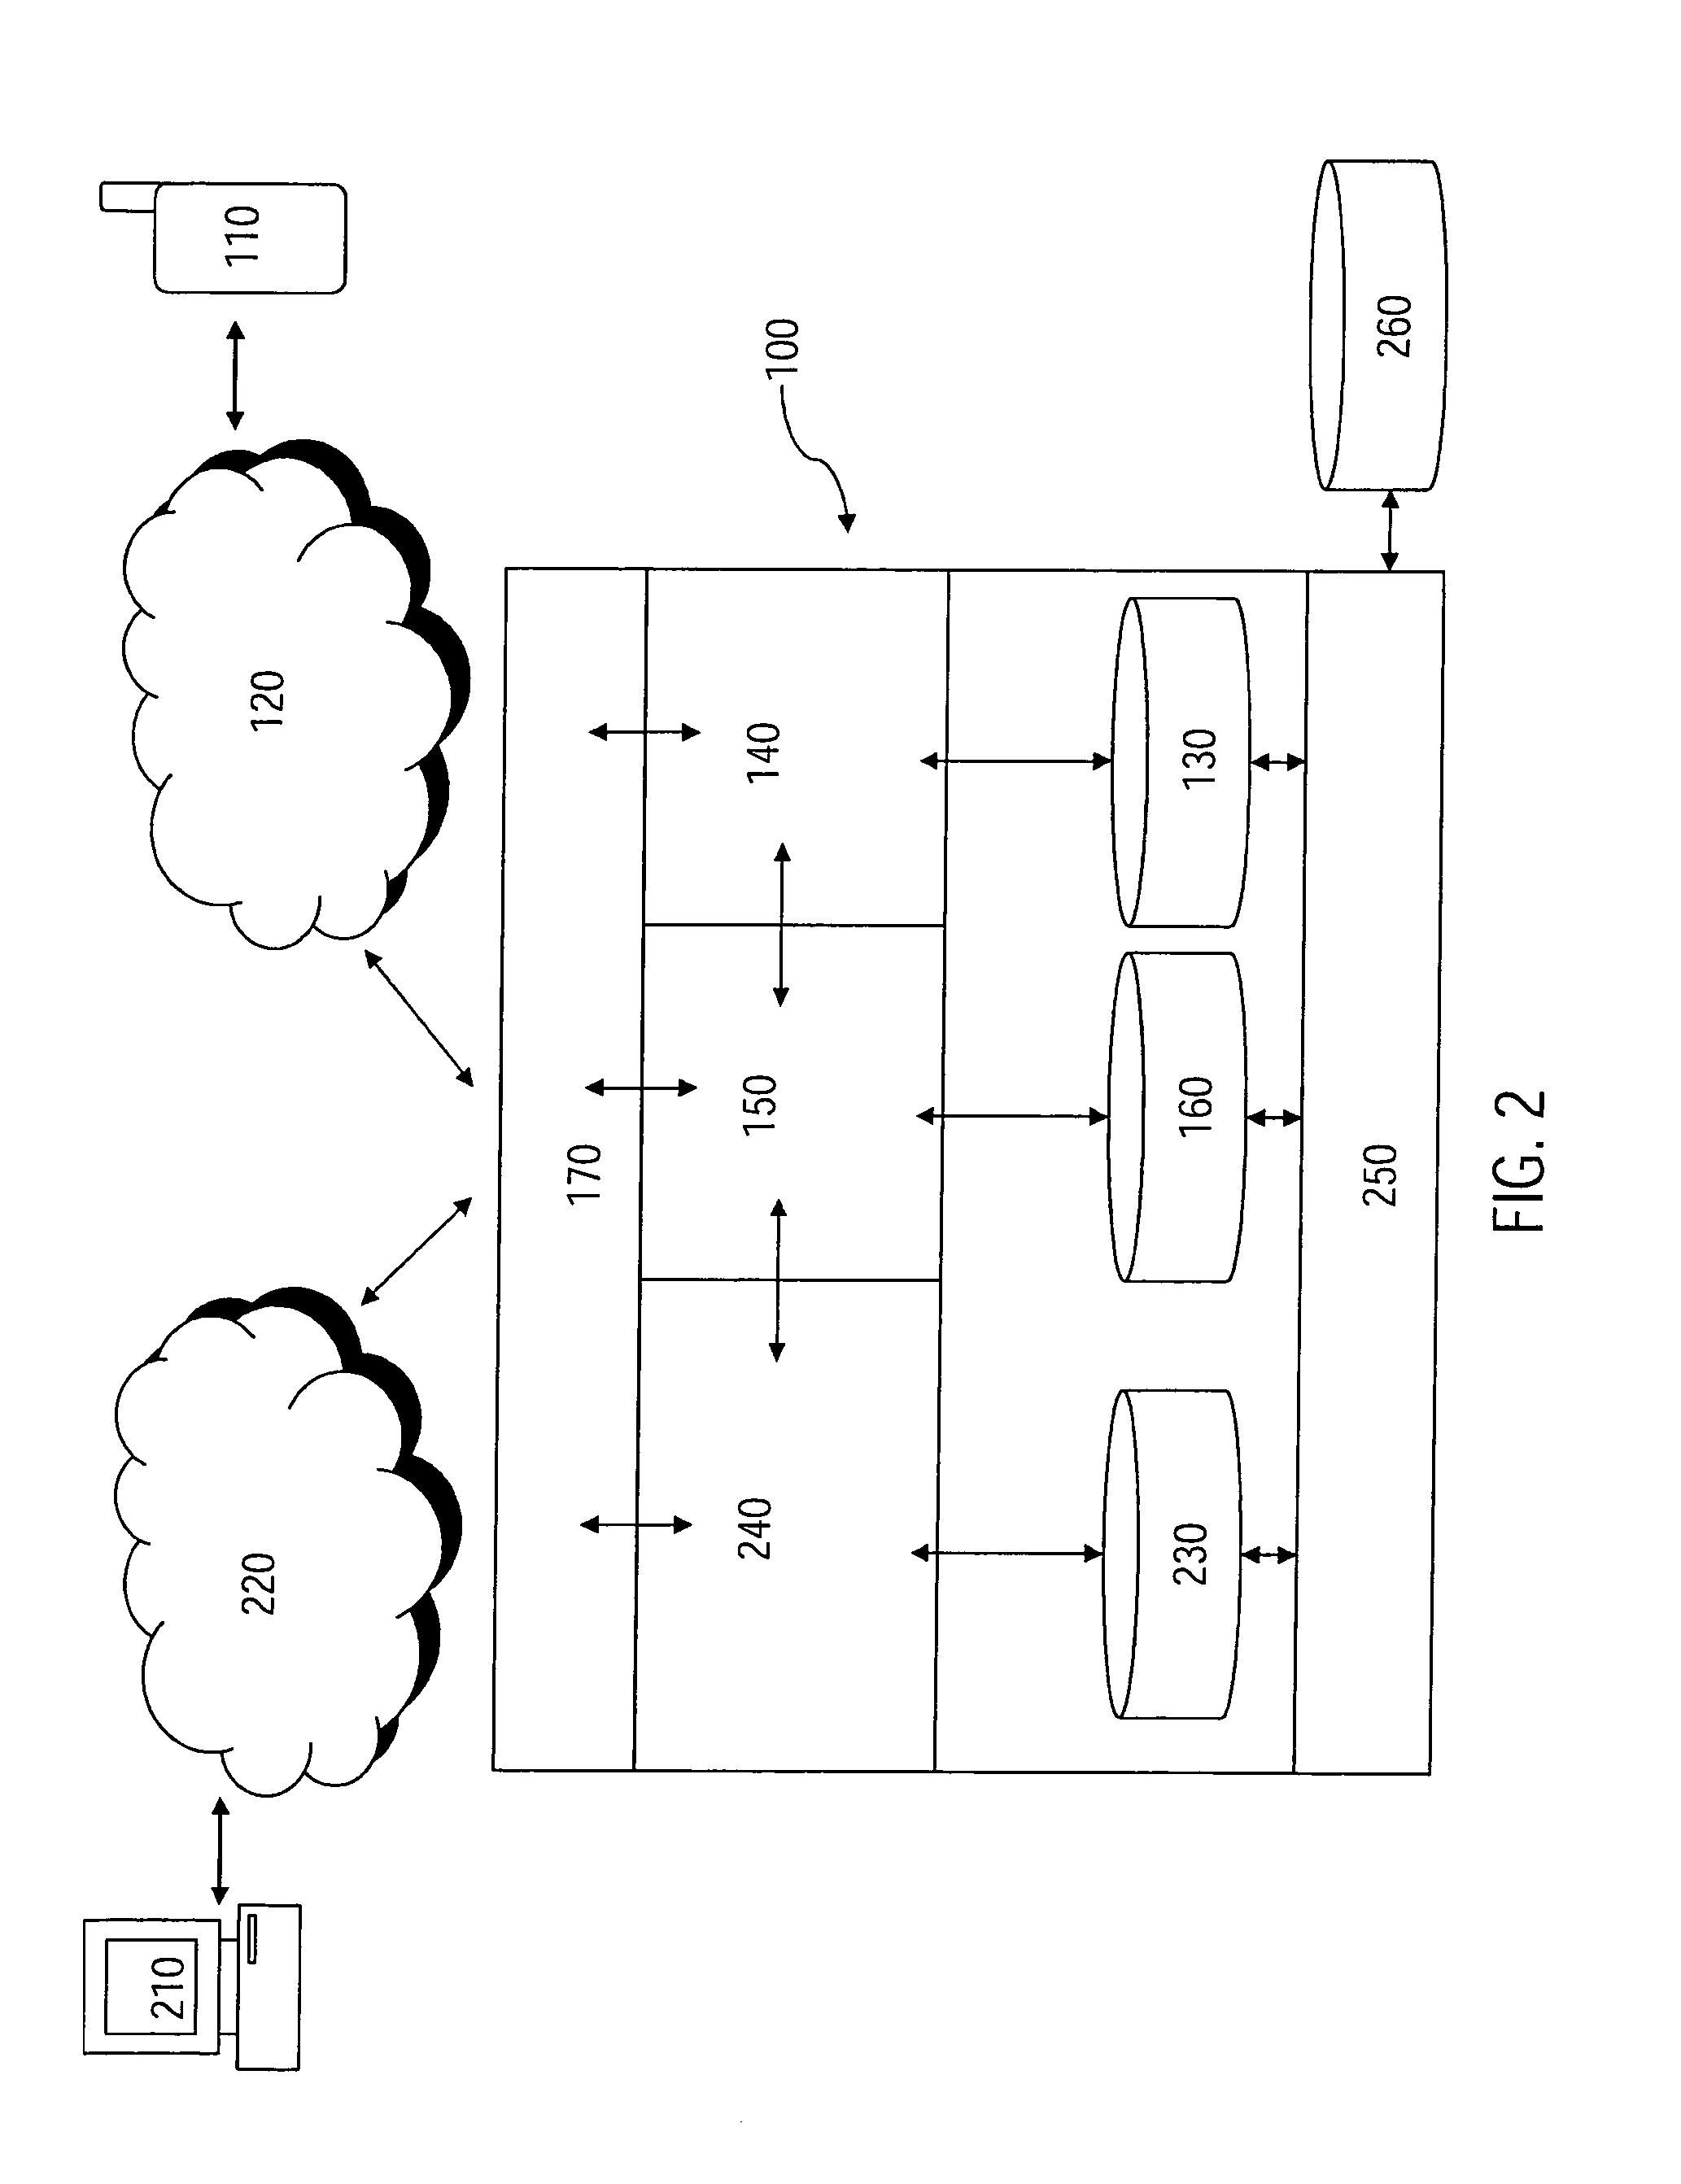 System and method for accessing multi-media content via a mobile terminal